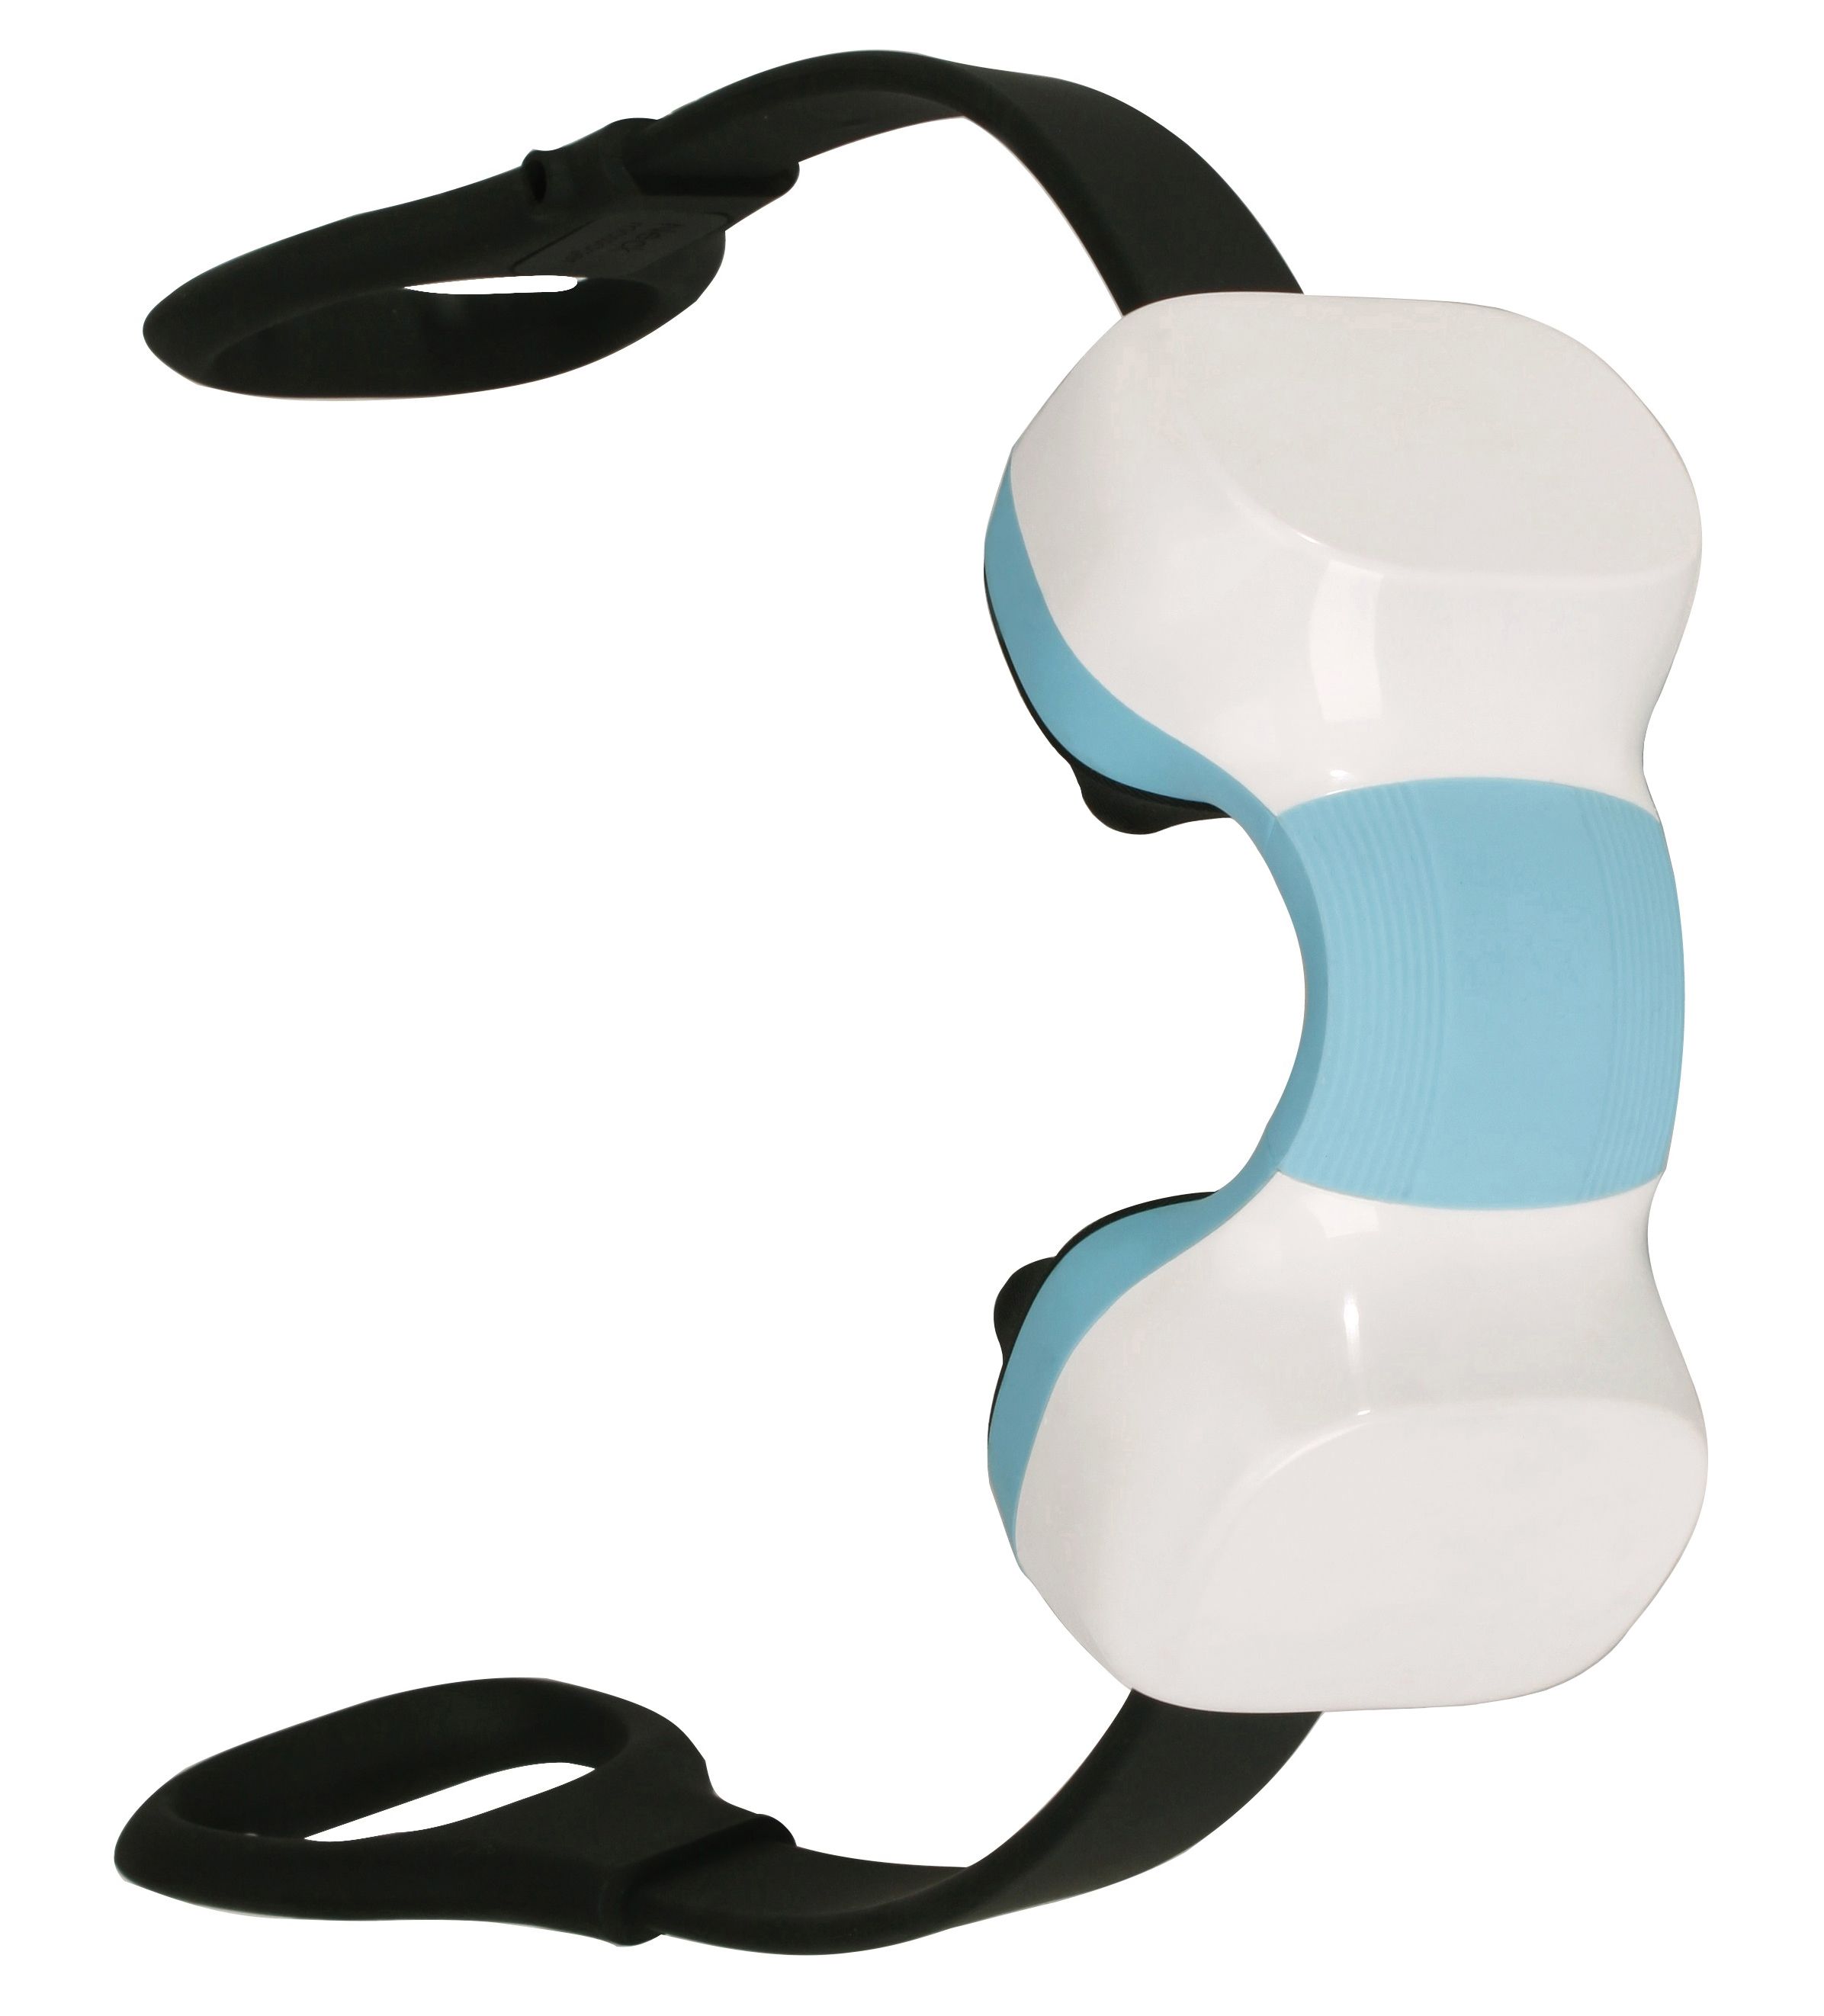 Carepeutic Battery-operated Handheld Massager at